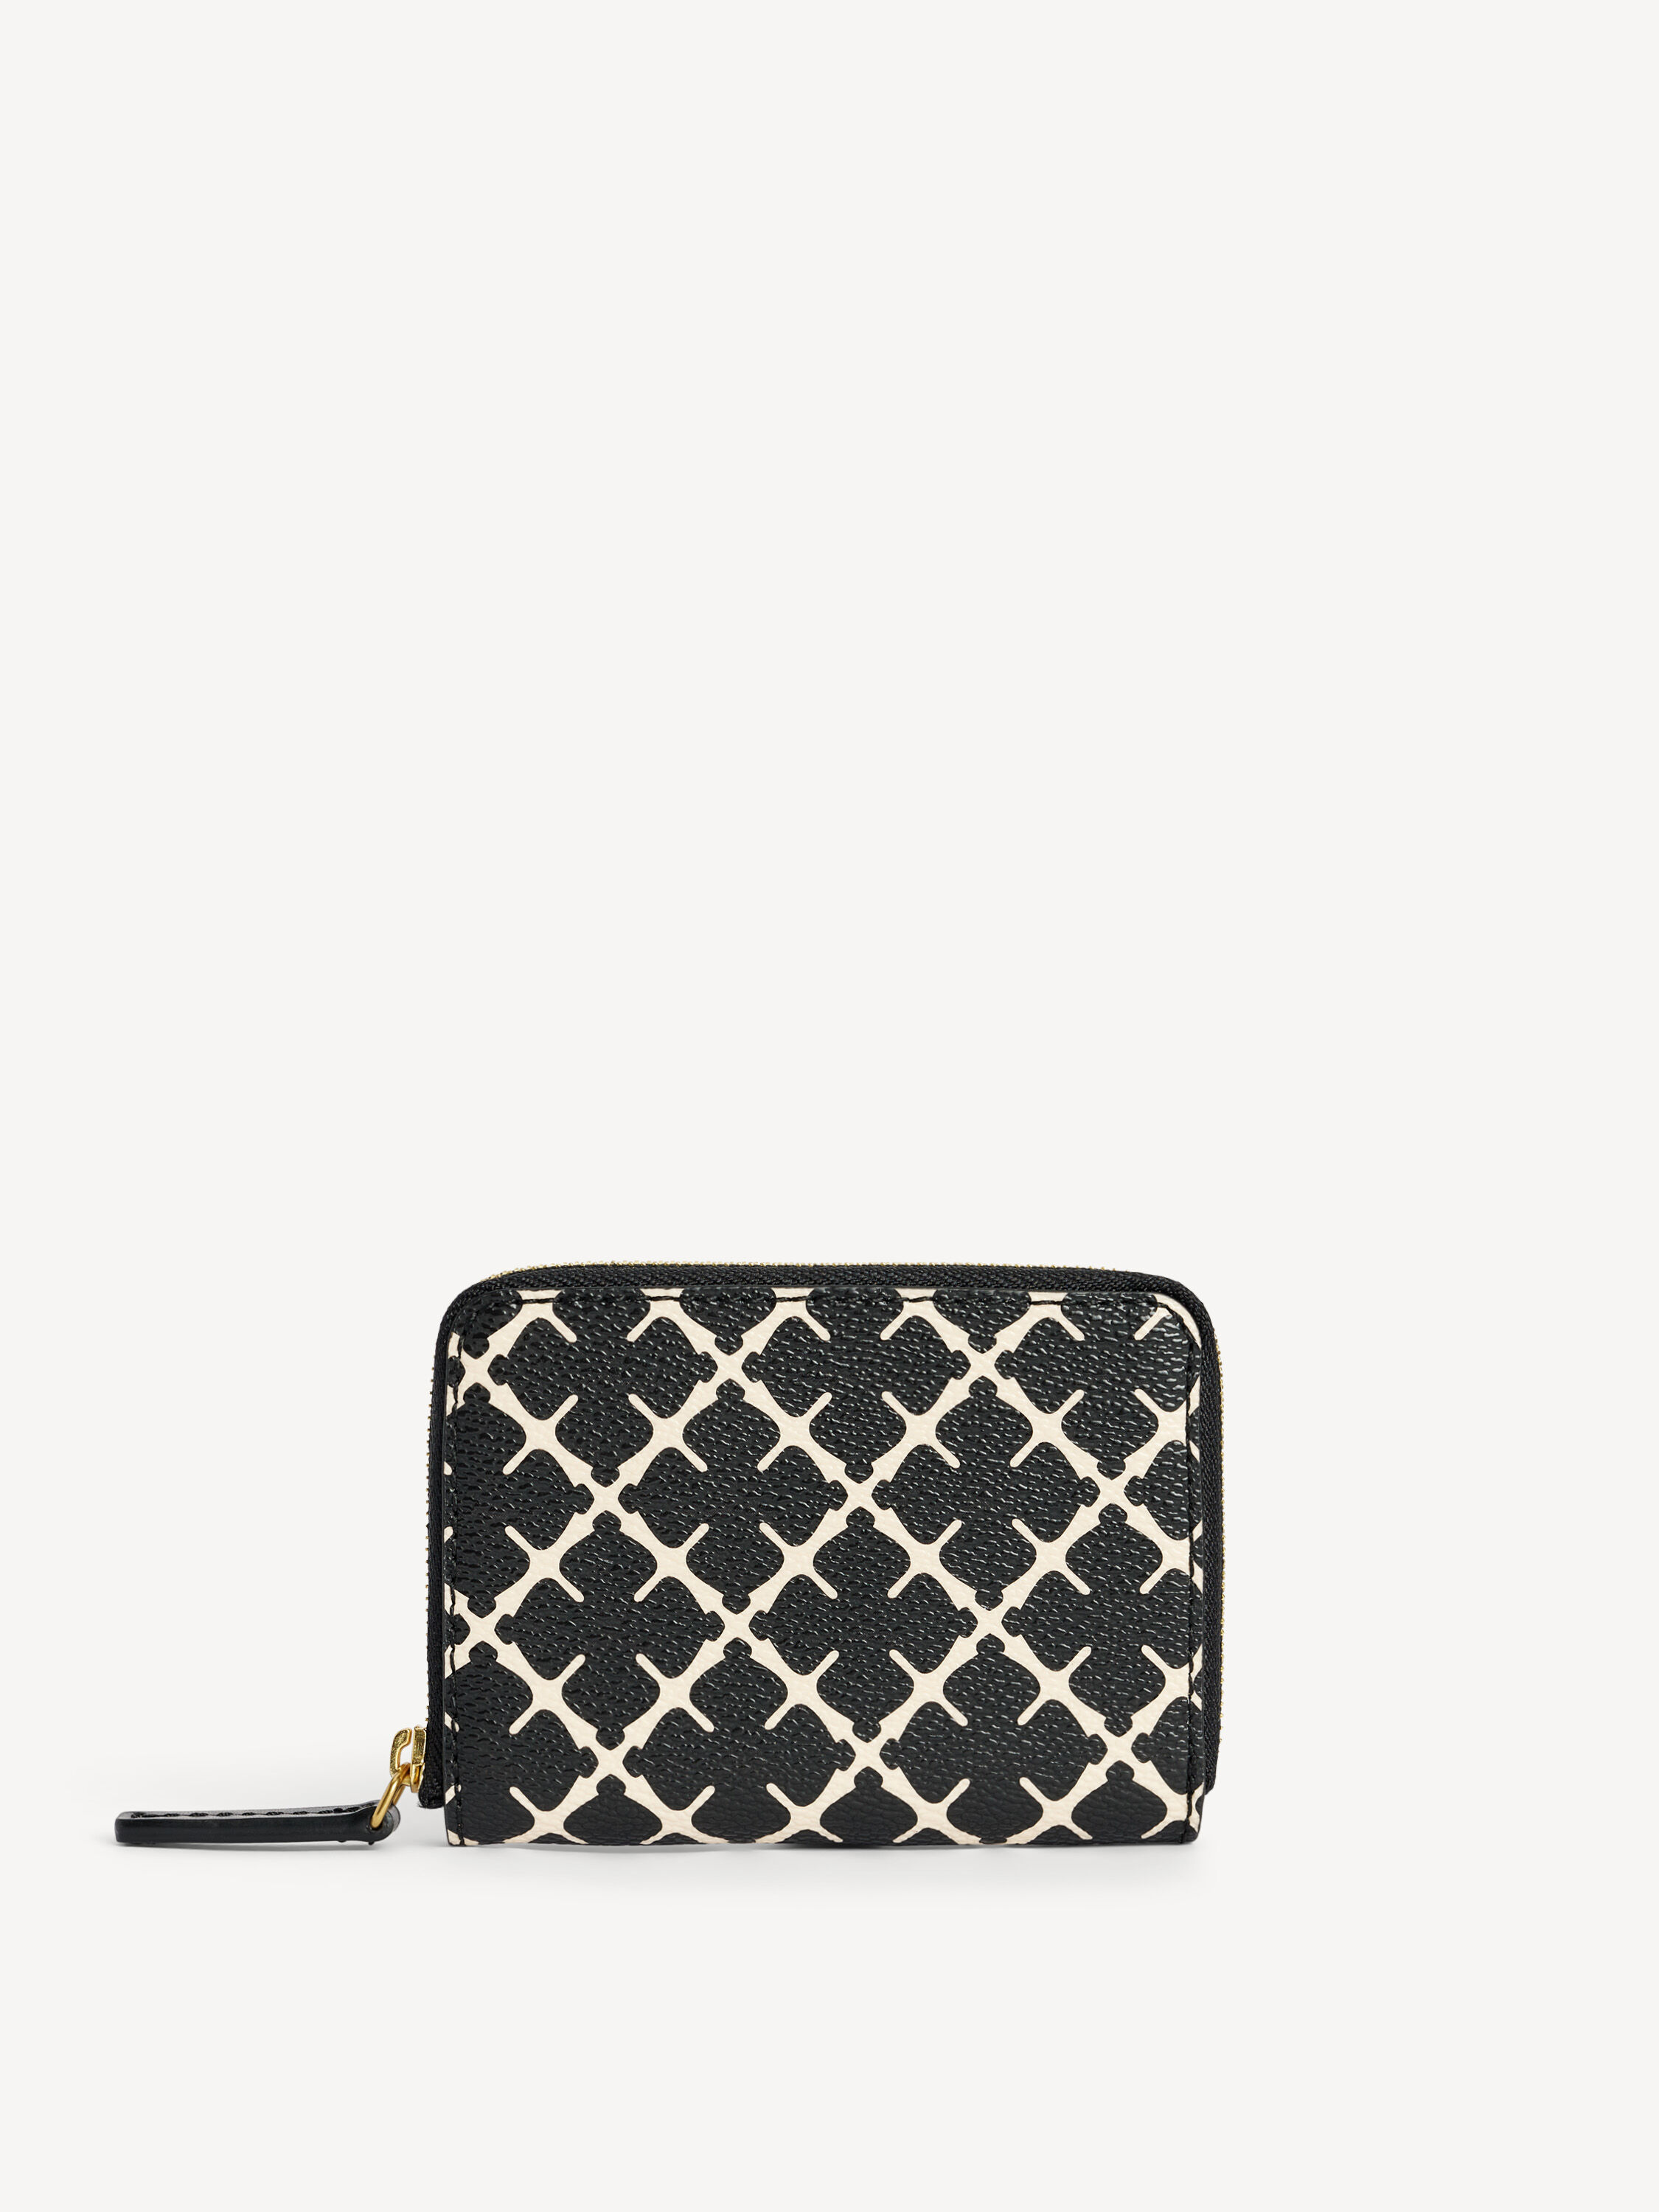 Wallets & cardholders | Explore all styles here | By Malene Birger